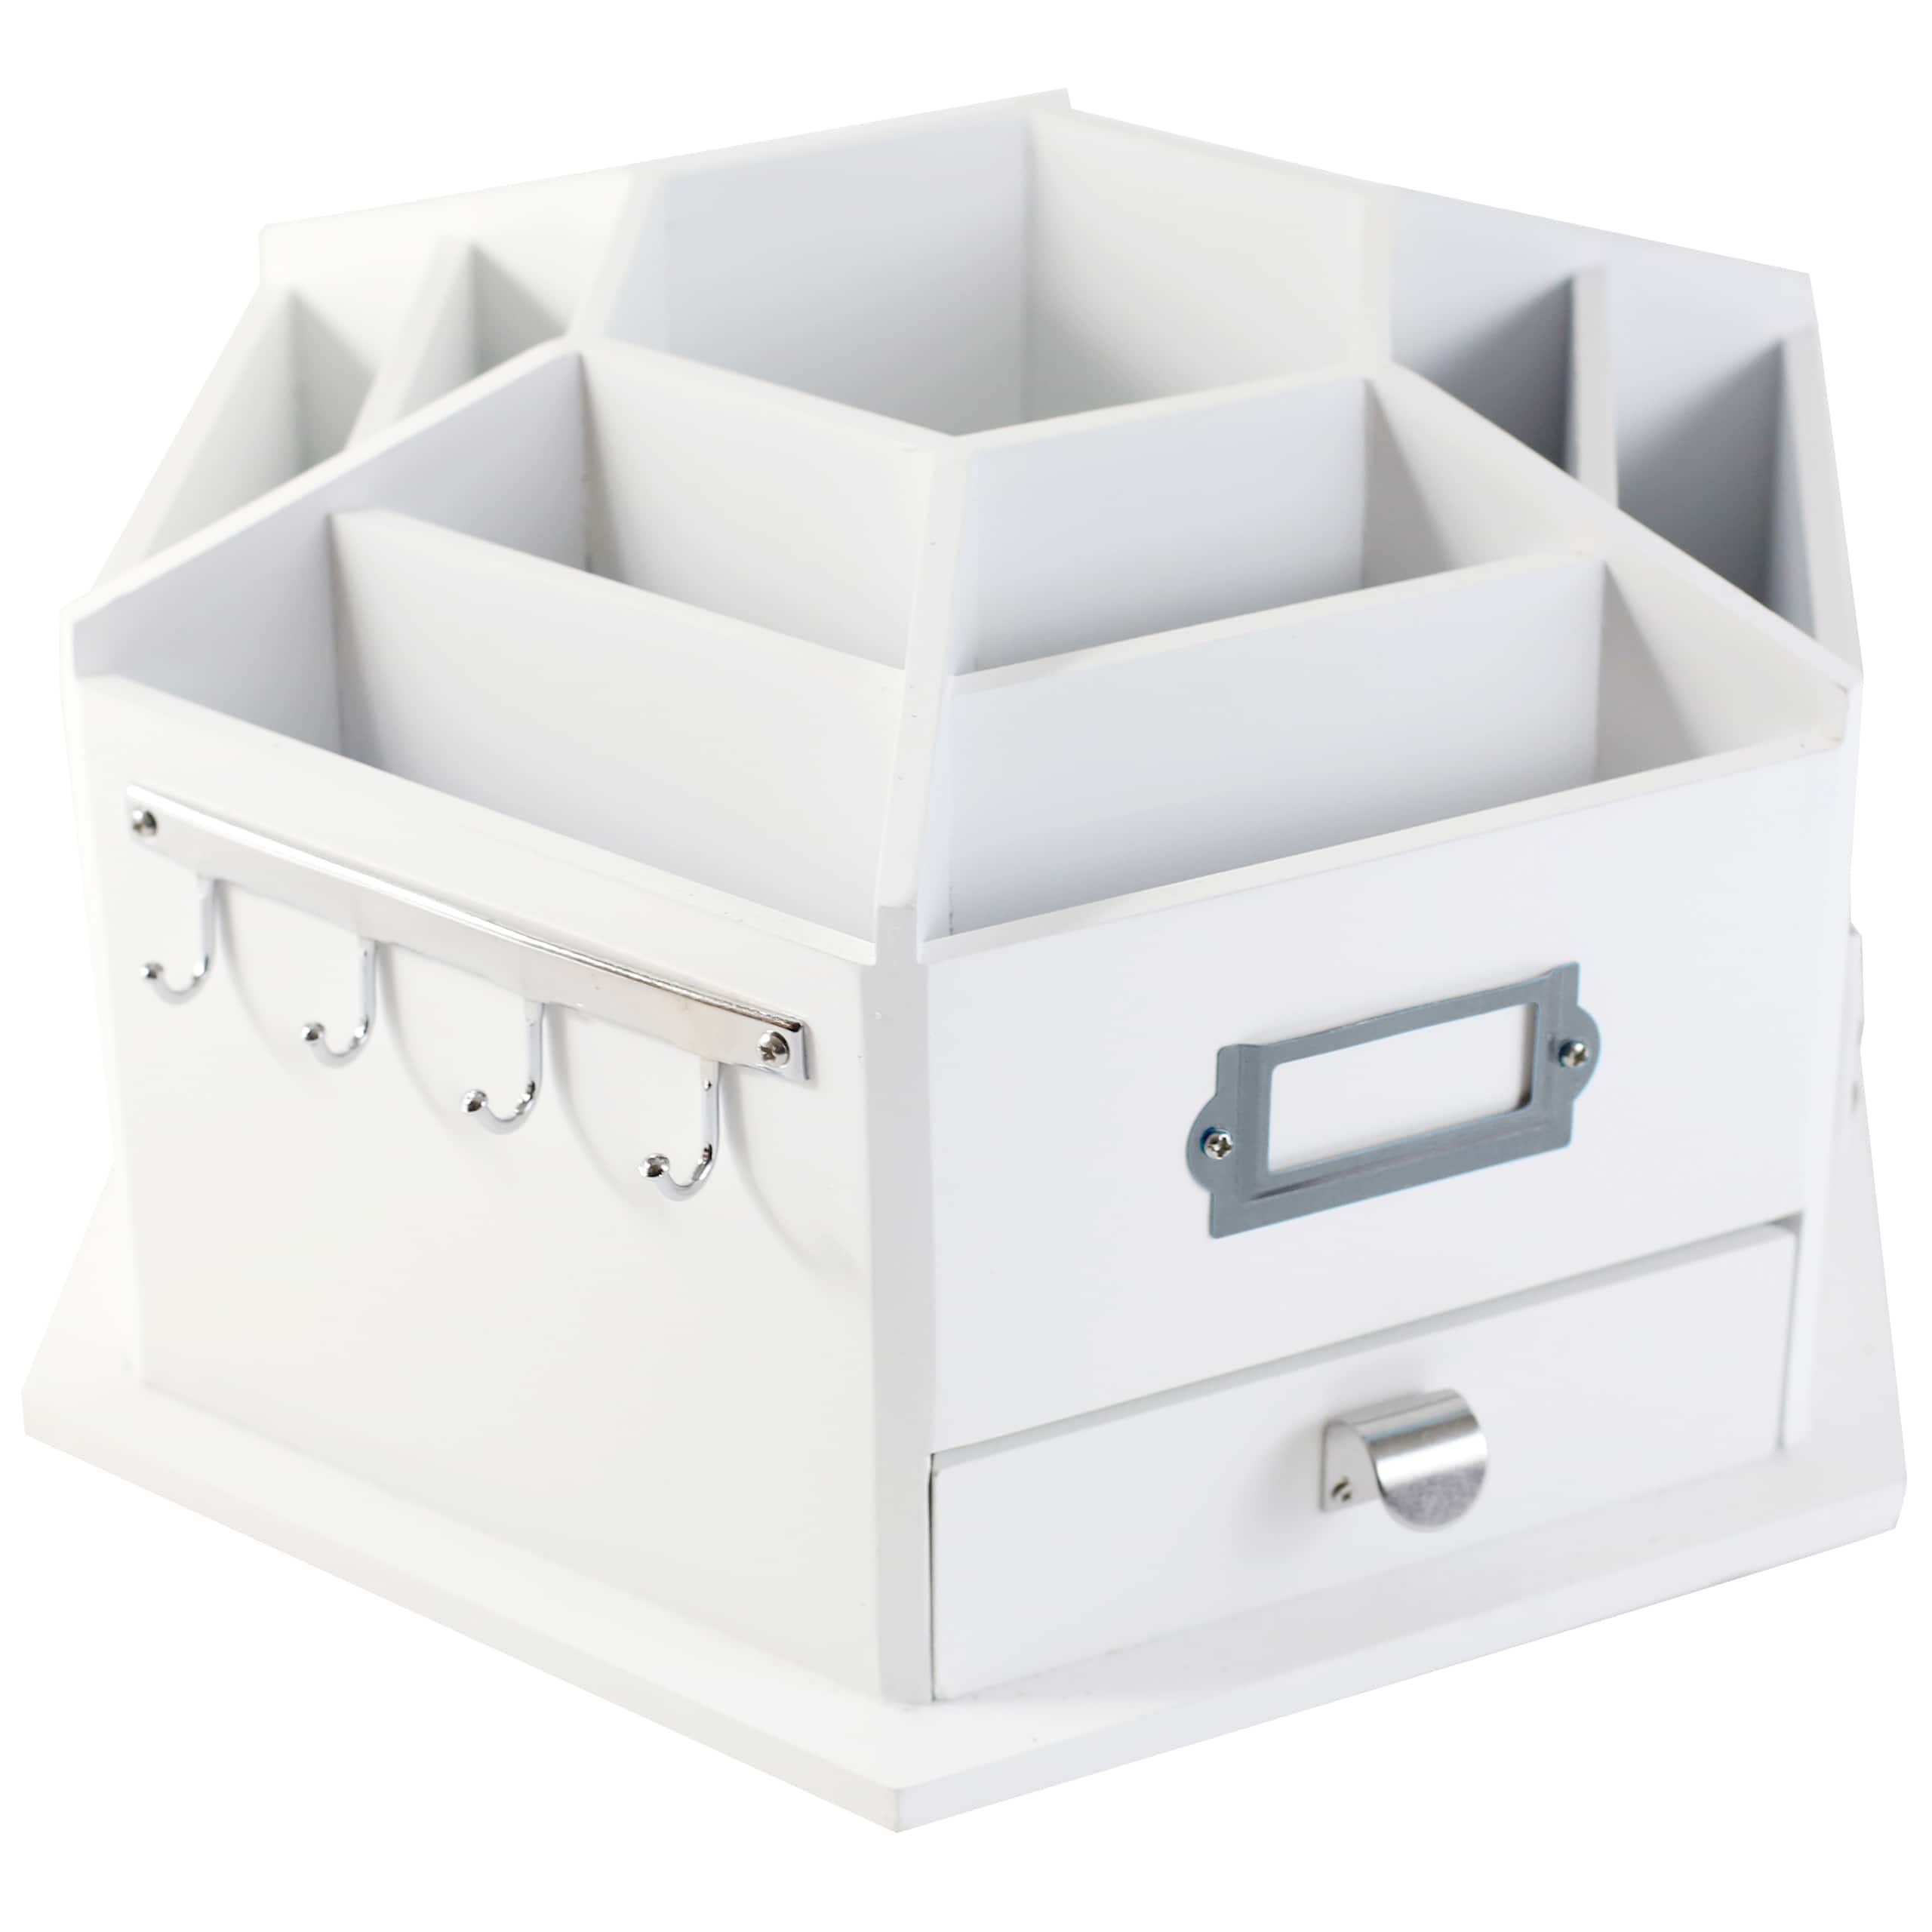 Michaels Simply Tidy Storage 